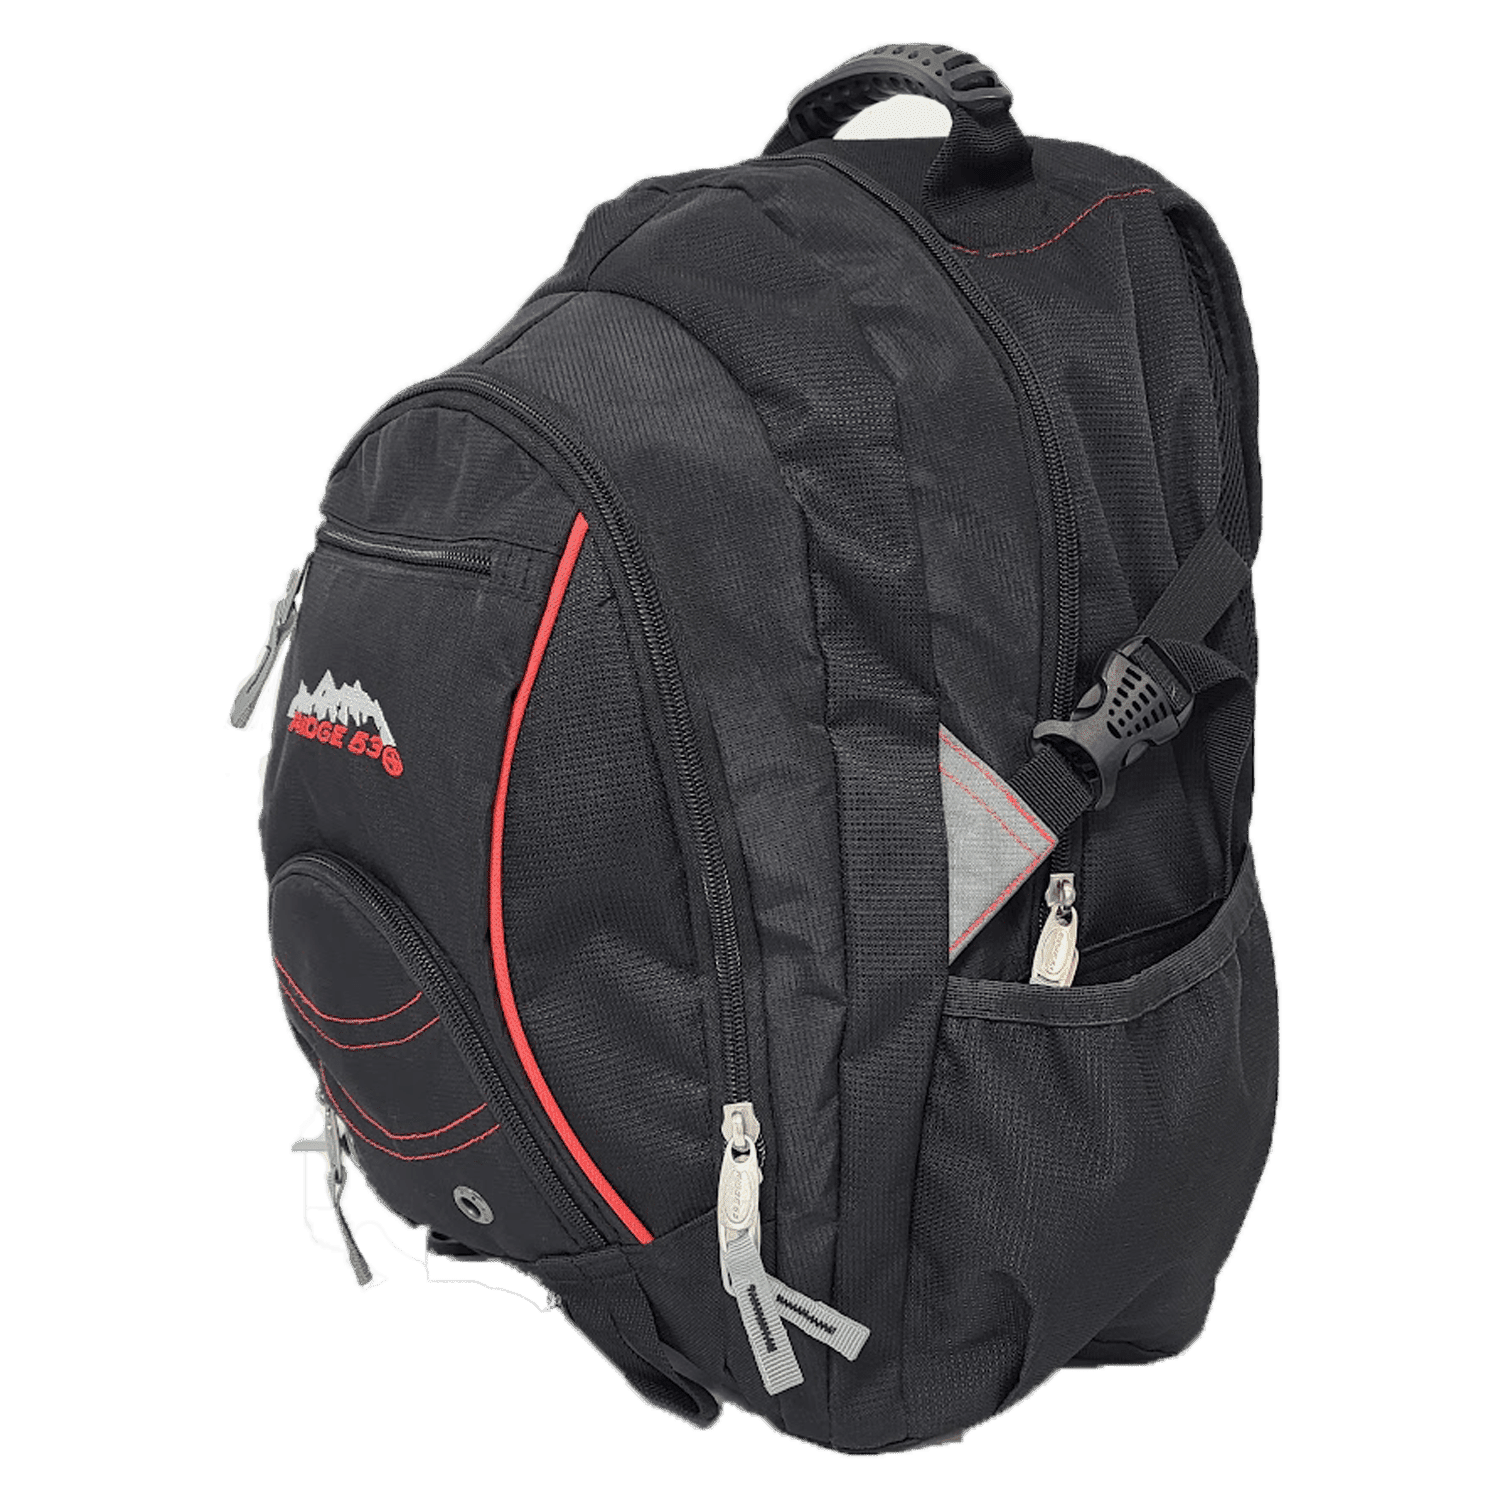 Sportech Ridge 53 – Bolton Backpack - Black/Red 2 Shaws Department Stores